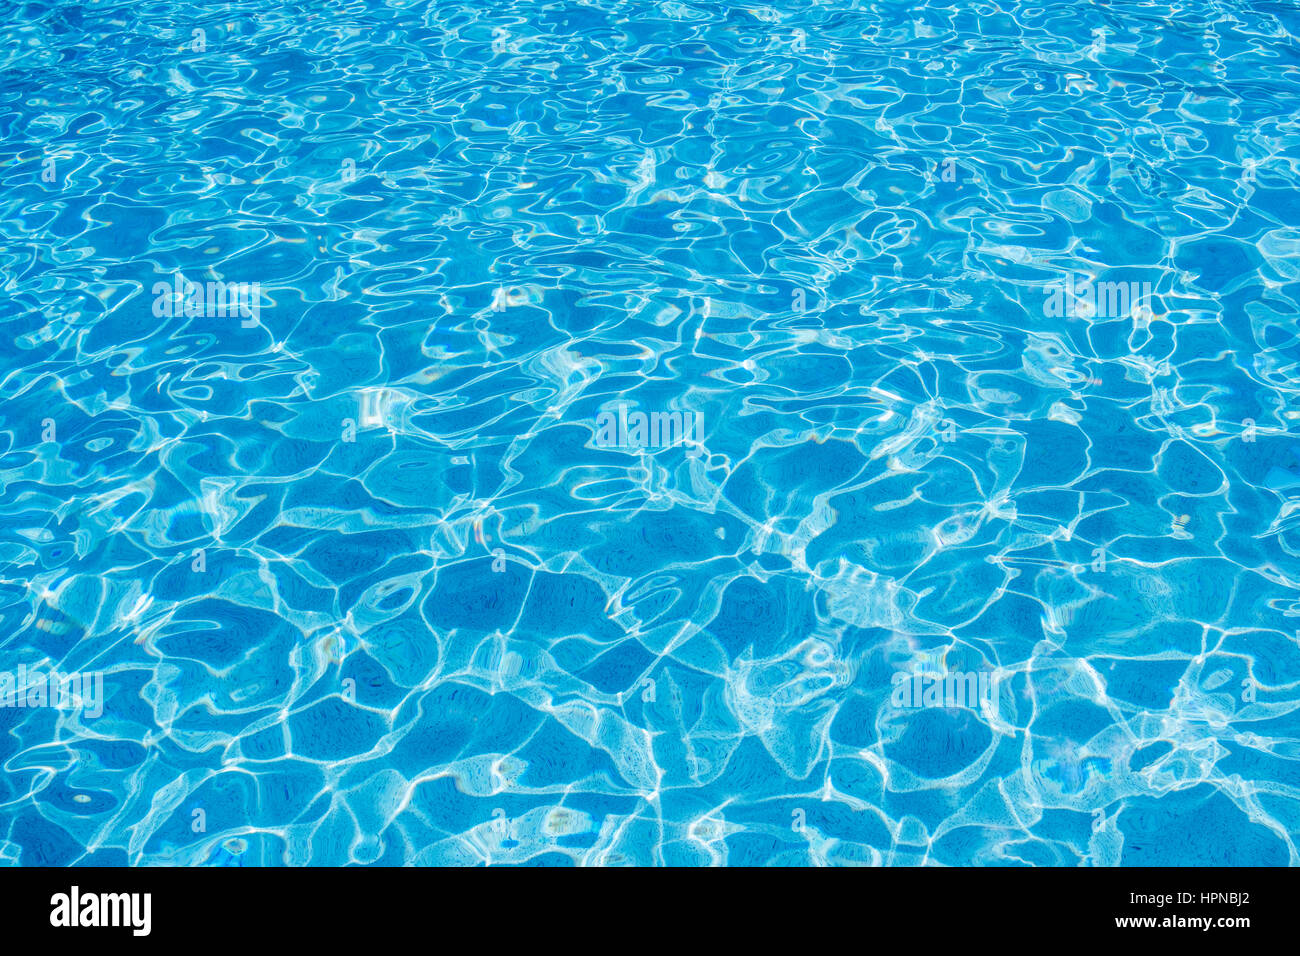 Swimming pool surface with reflections Stock Photo